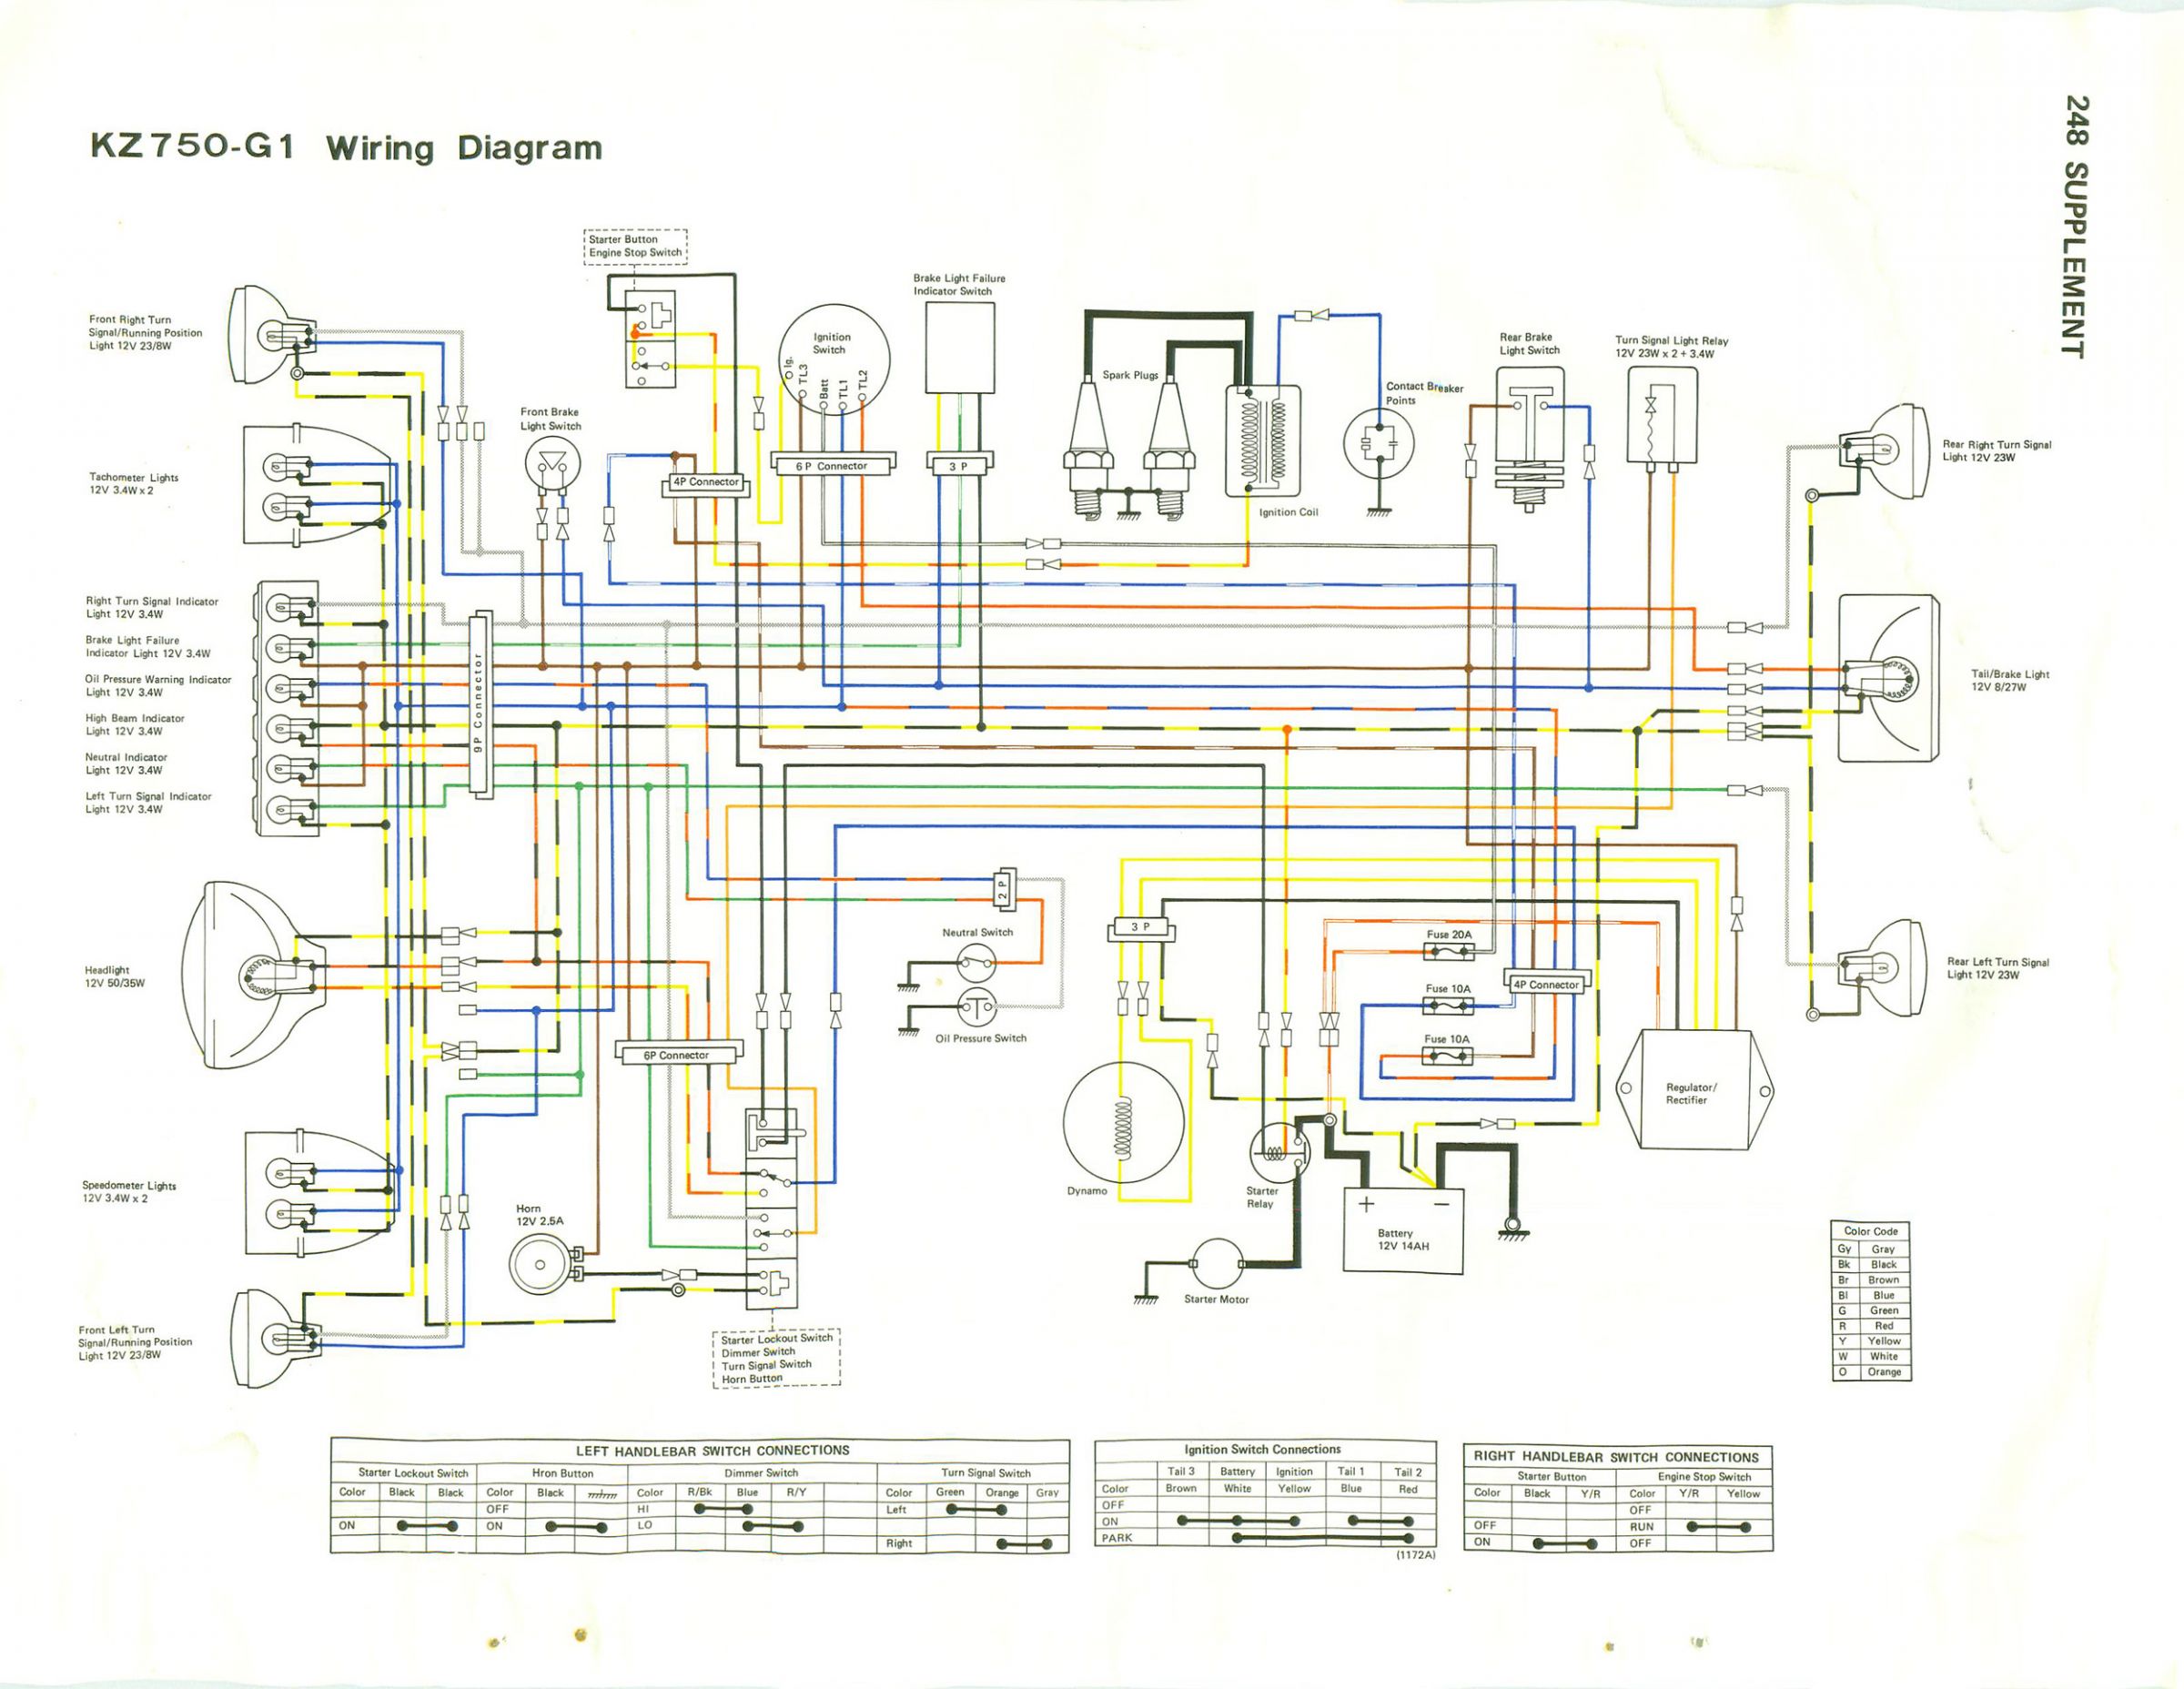 Simplified wiring on a 1980 kz750g twin, w/2 carbs - KZRider Forum ...